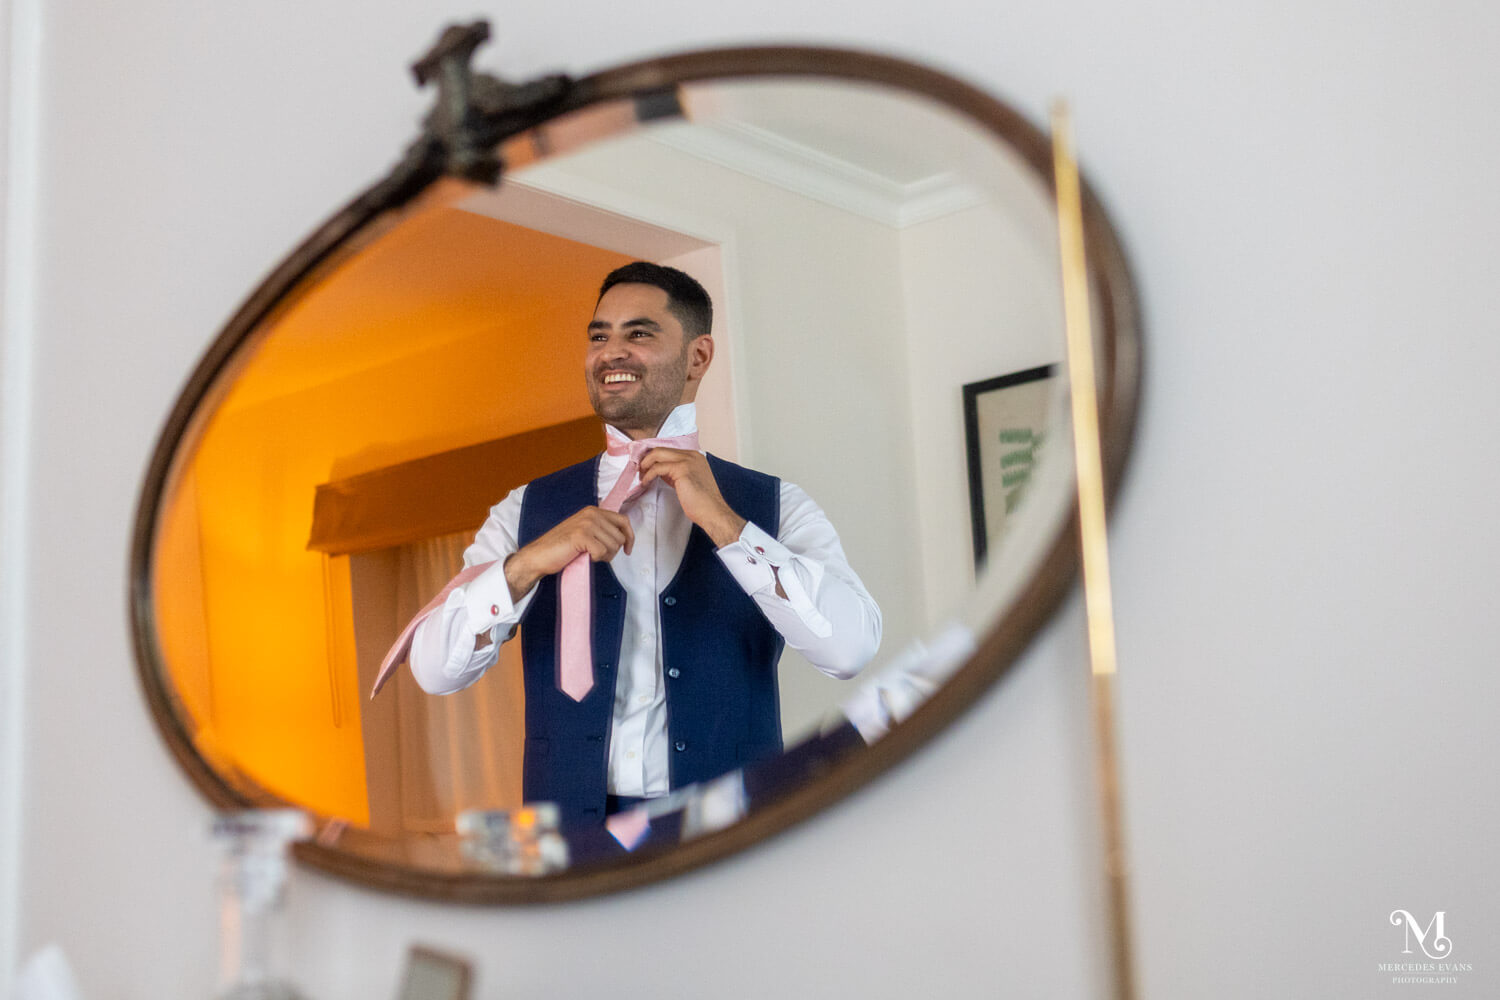 a mirror reflection of the smiling groom doing up his pink tie